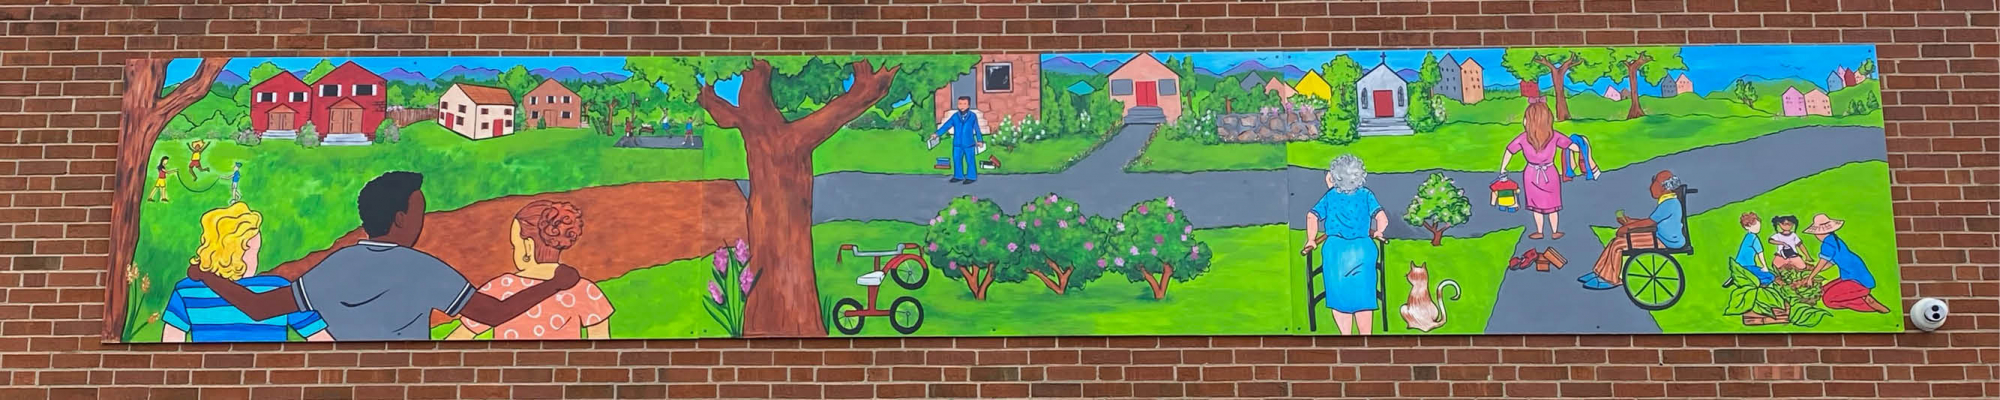 Mural of our community